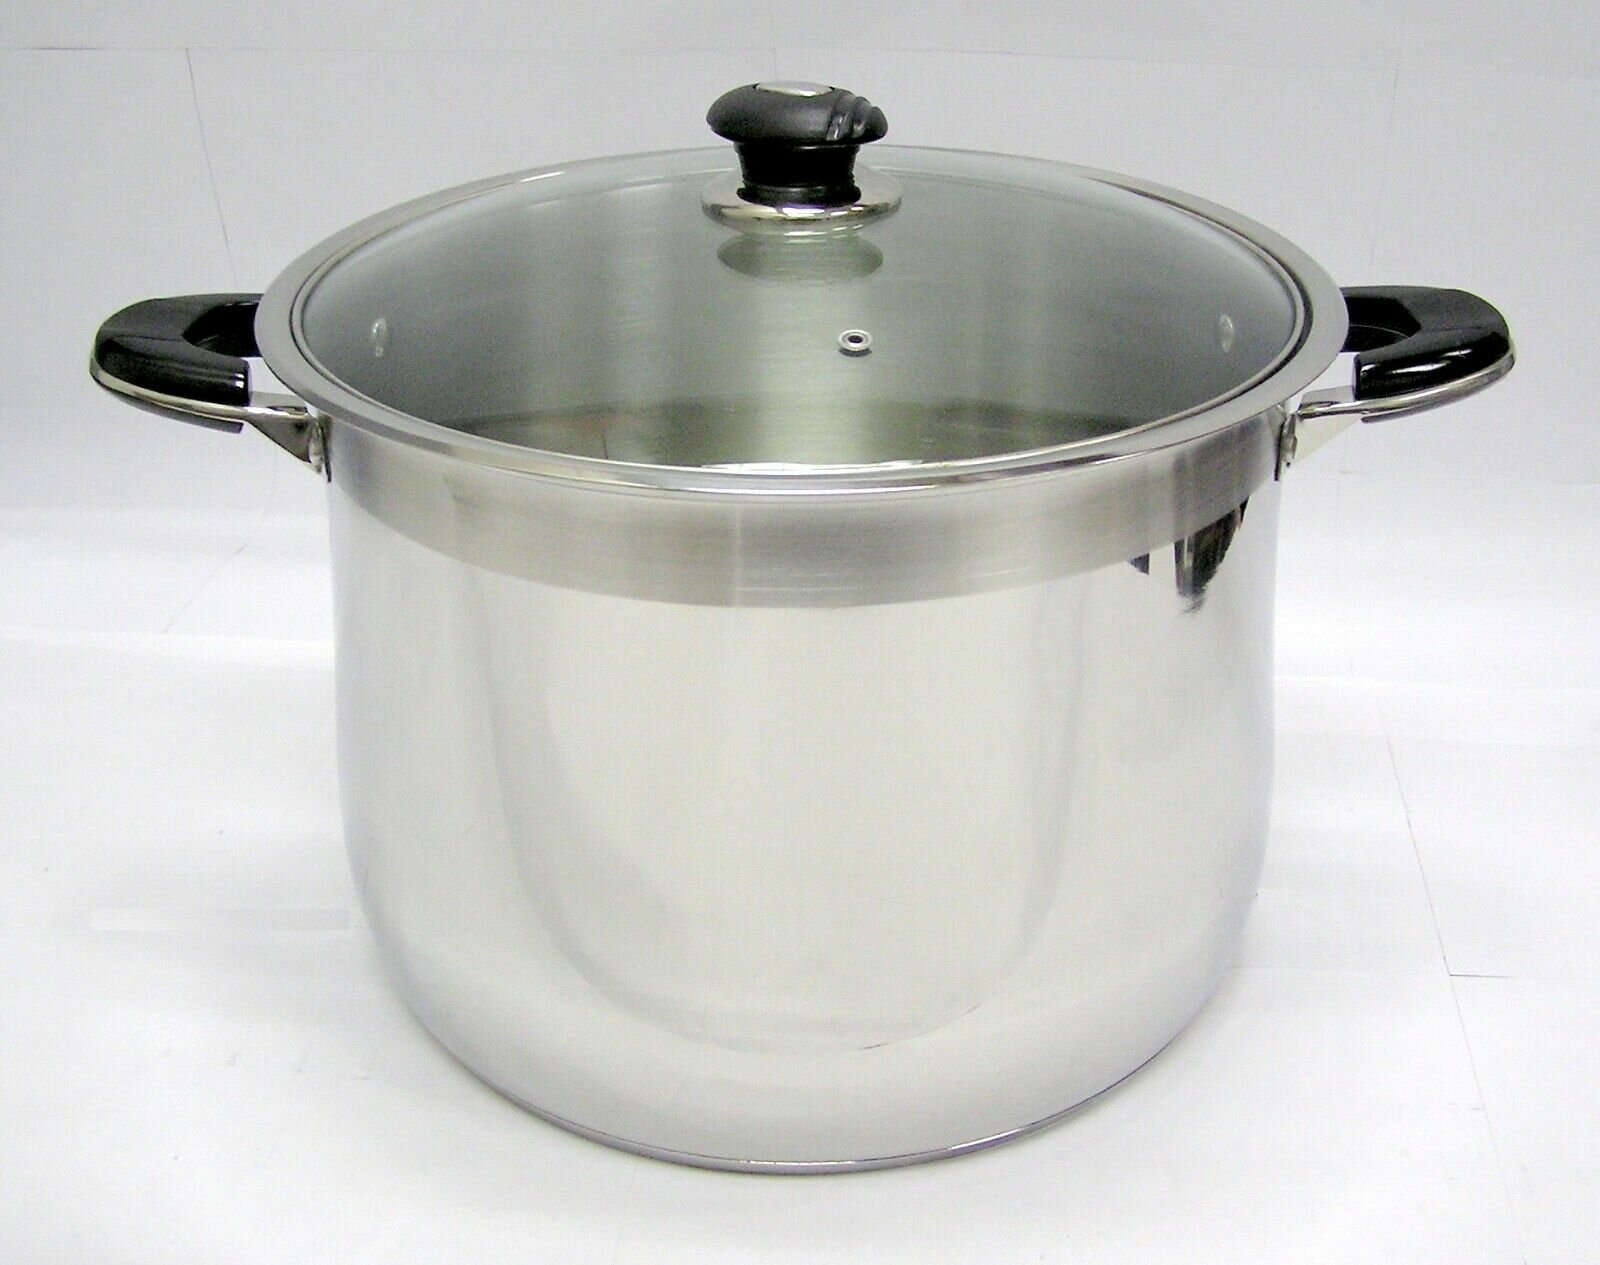 Gourmet Accessories, Stainless Steel Stockpot with lid, 16 quart